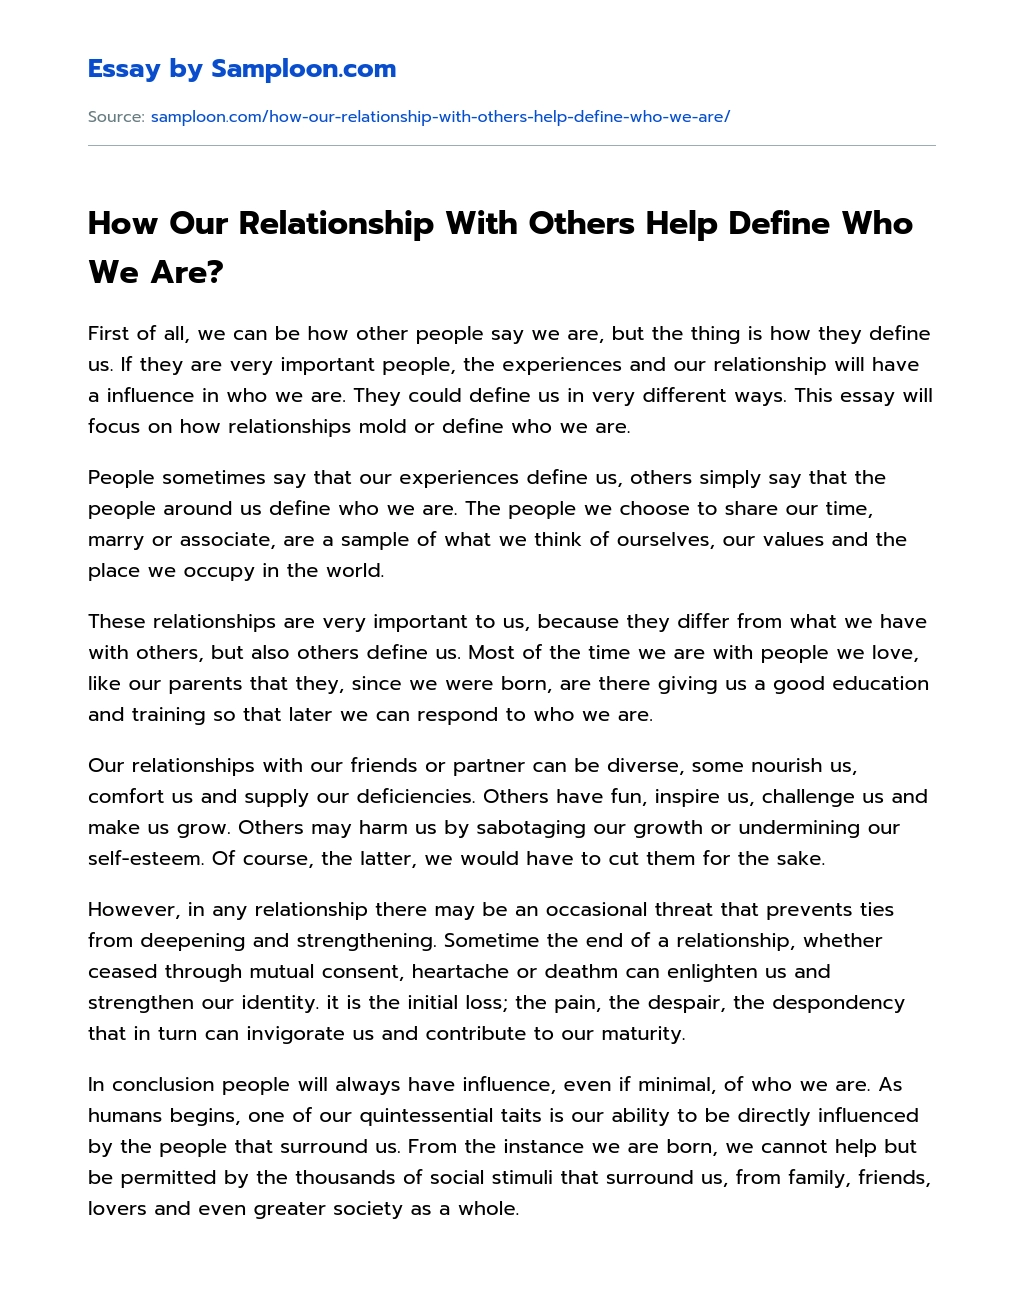 How Our Relationship With Others Help Define Who We Are? essay